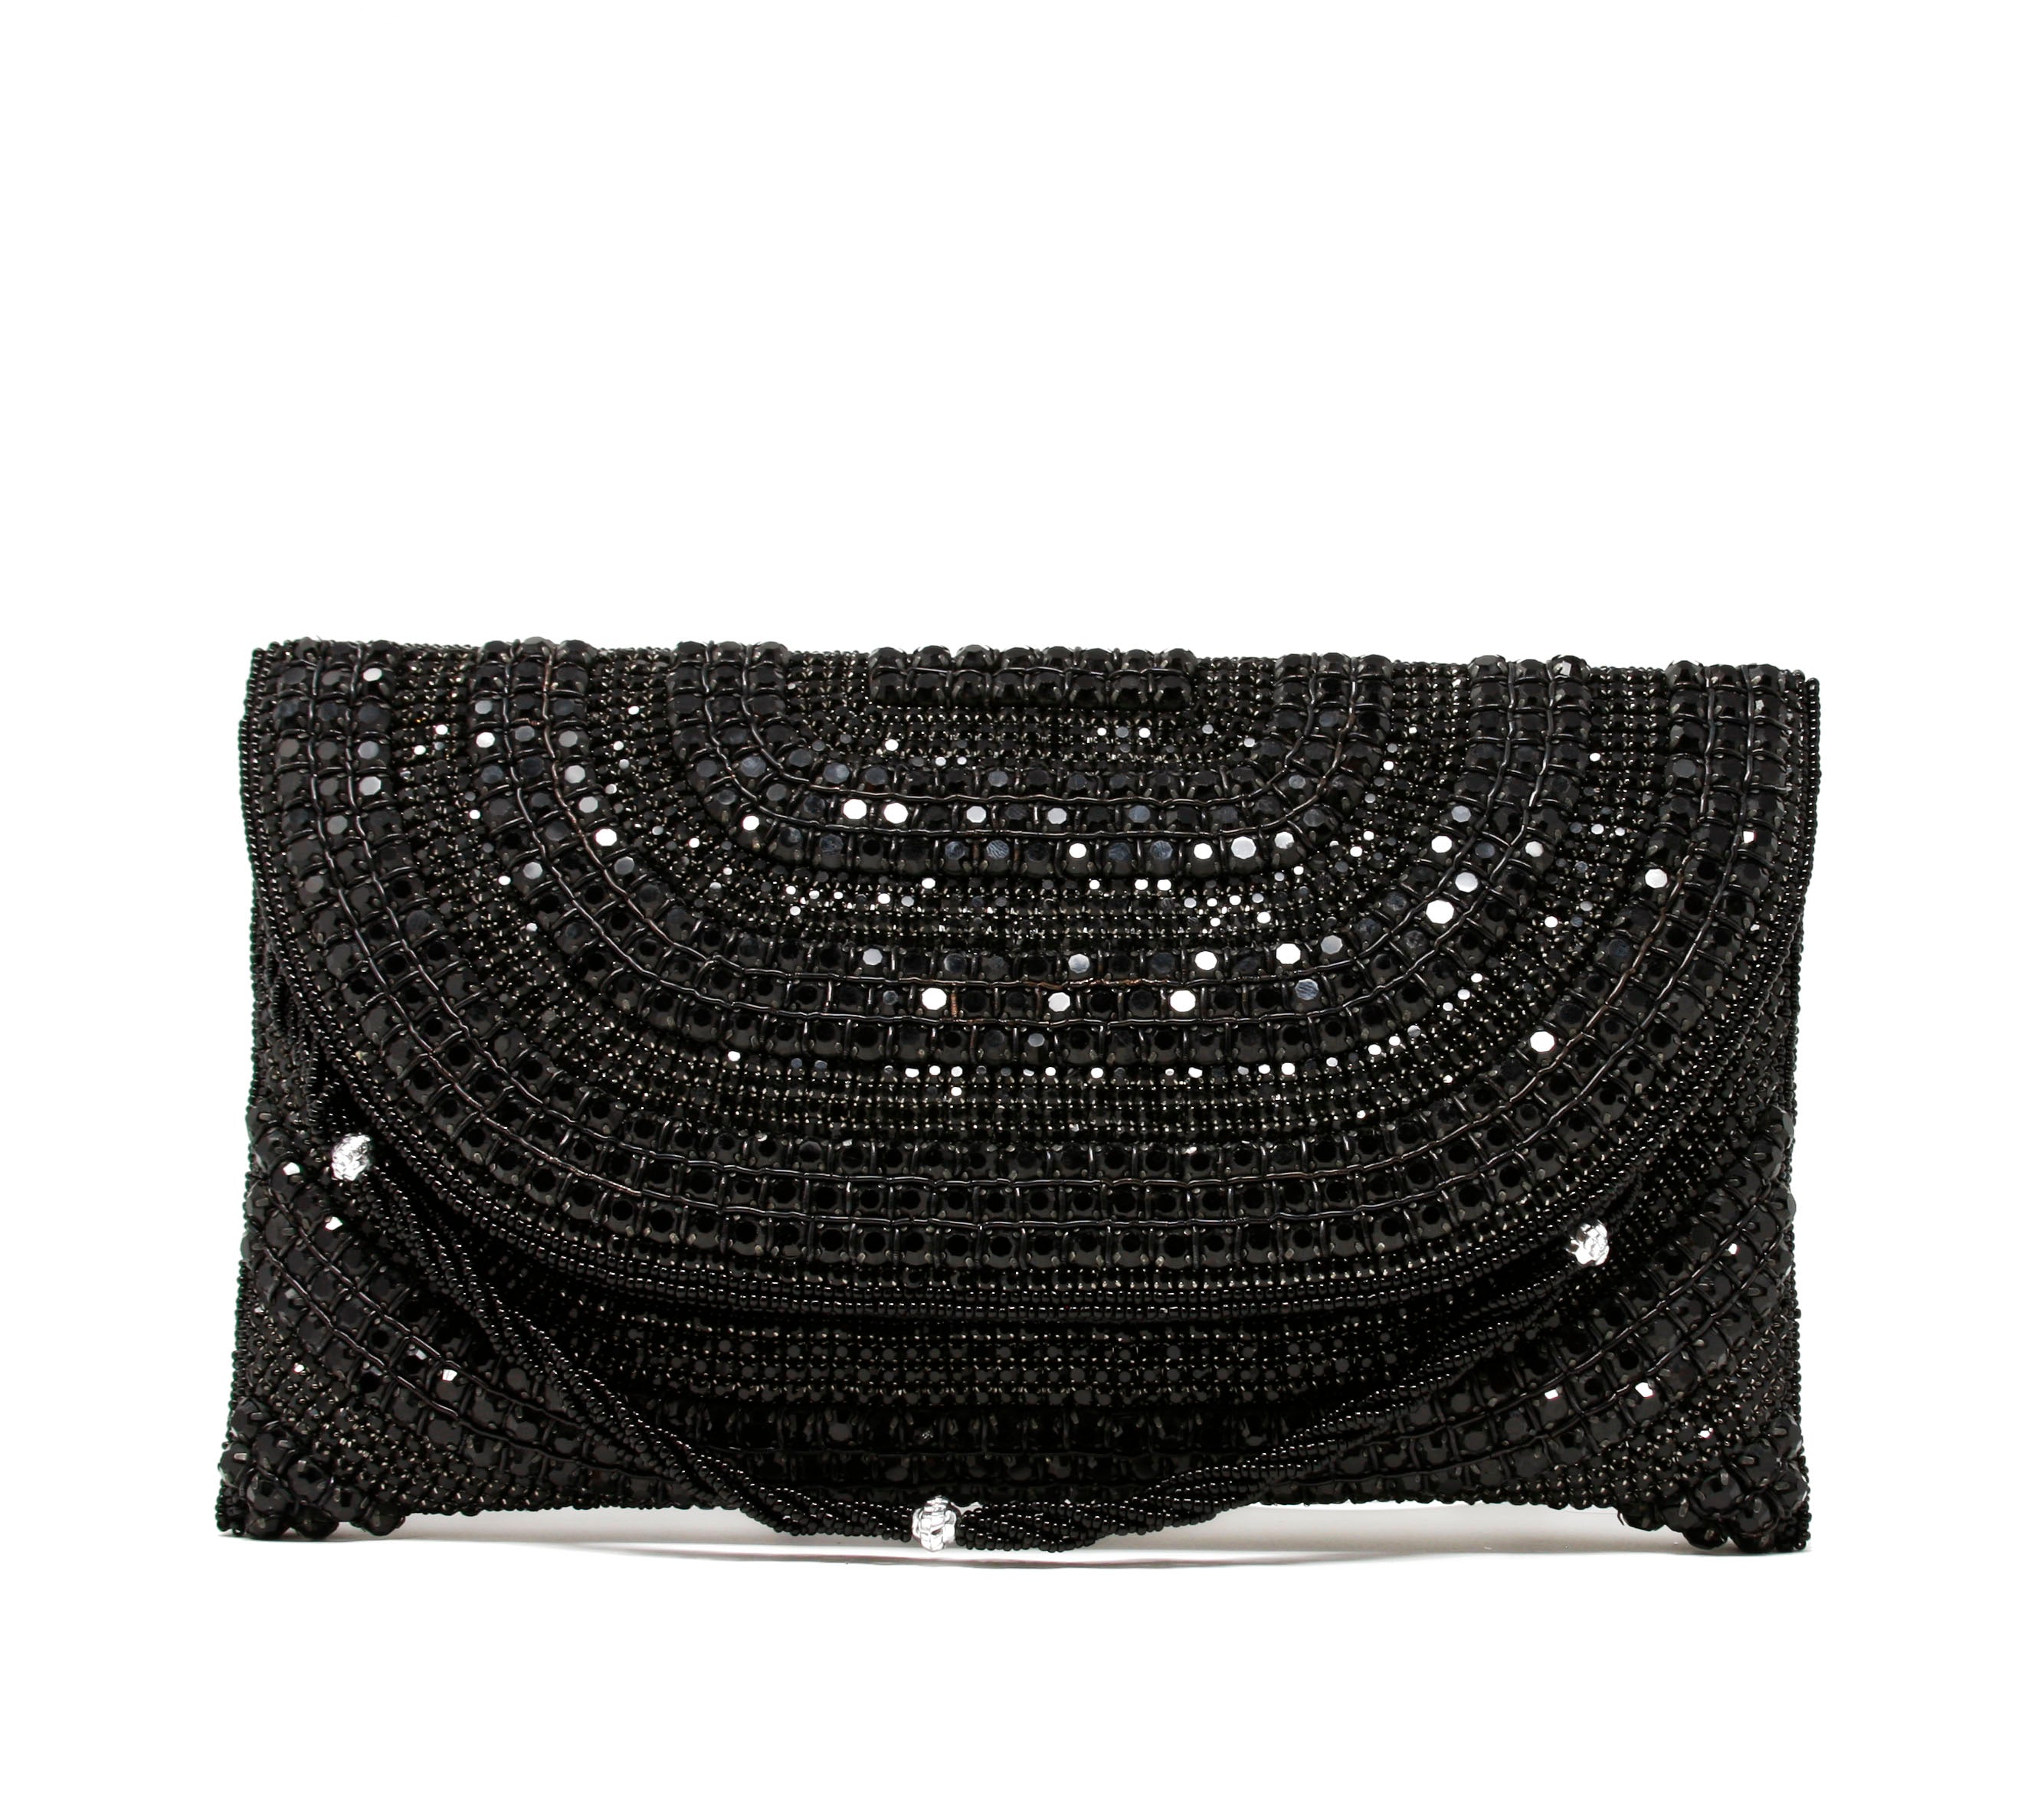 Black, twisting beaded wristlet with silver crystals evening bag embroidered with beads and rhinestones.